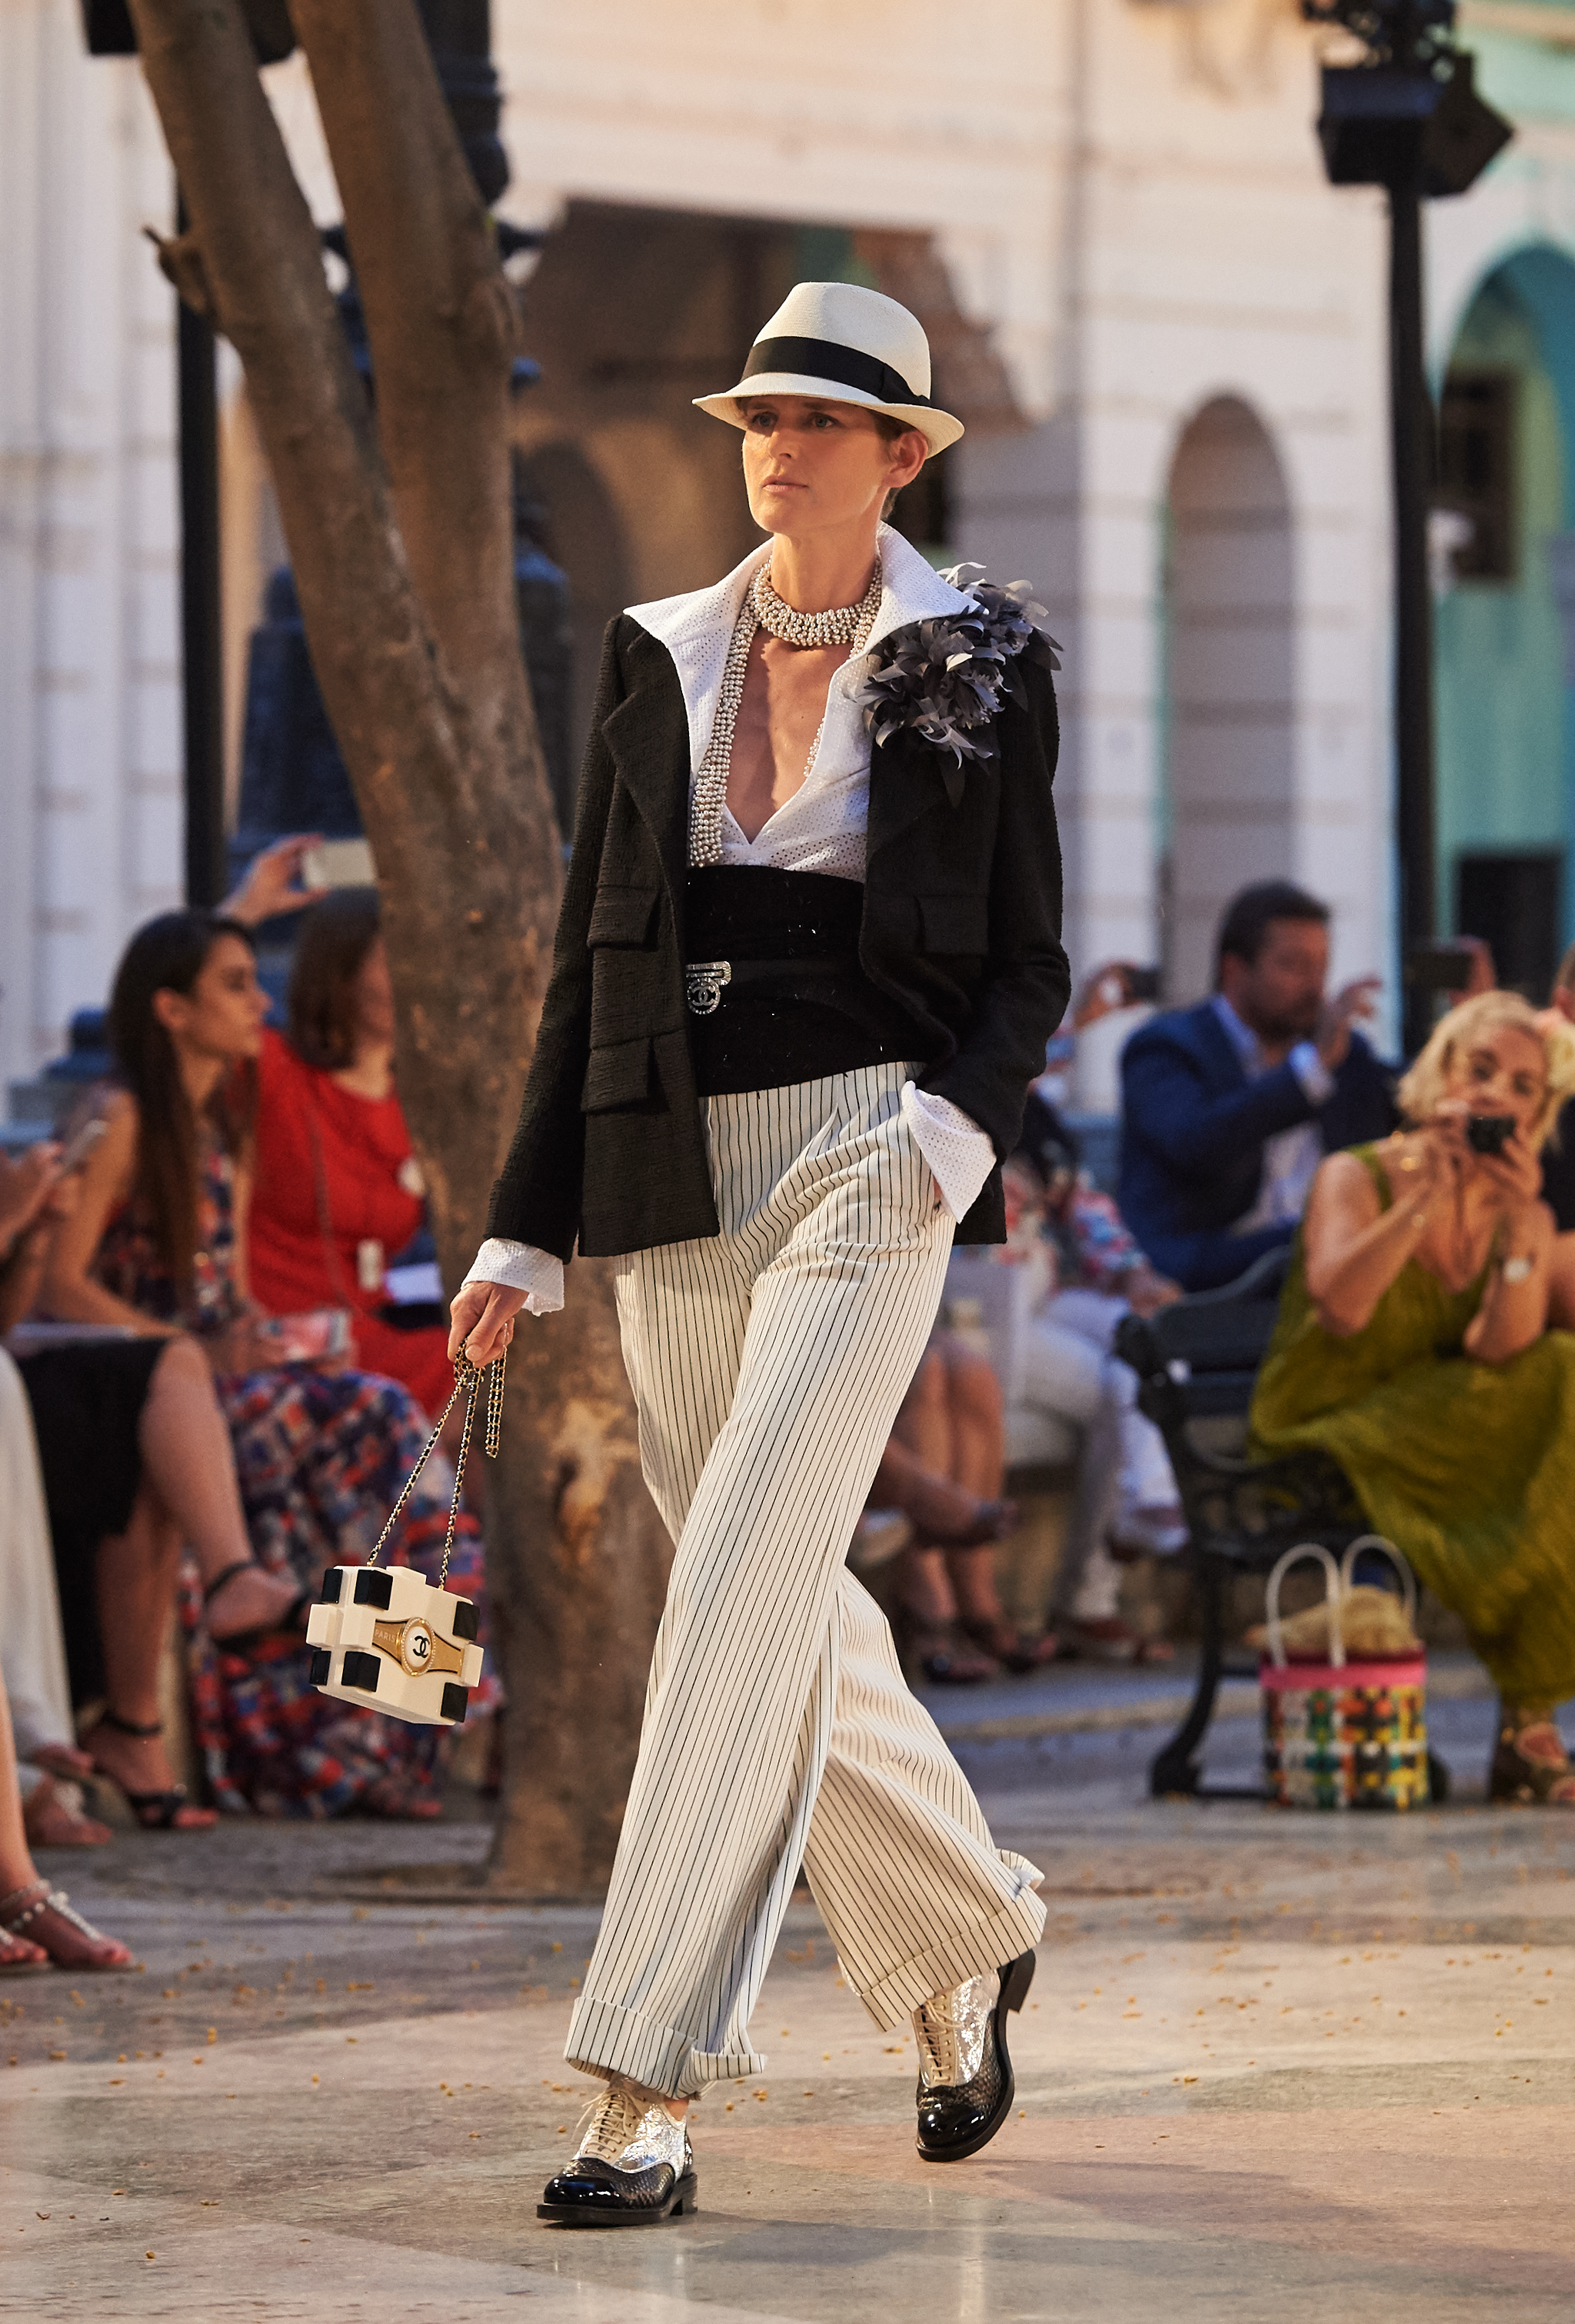 Chanel Cruise Collection 2016/17 CUBA Runway Report — PAM